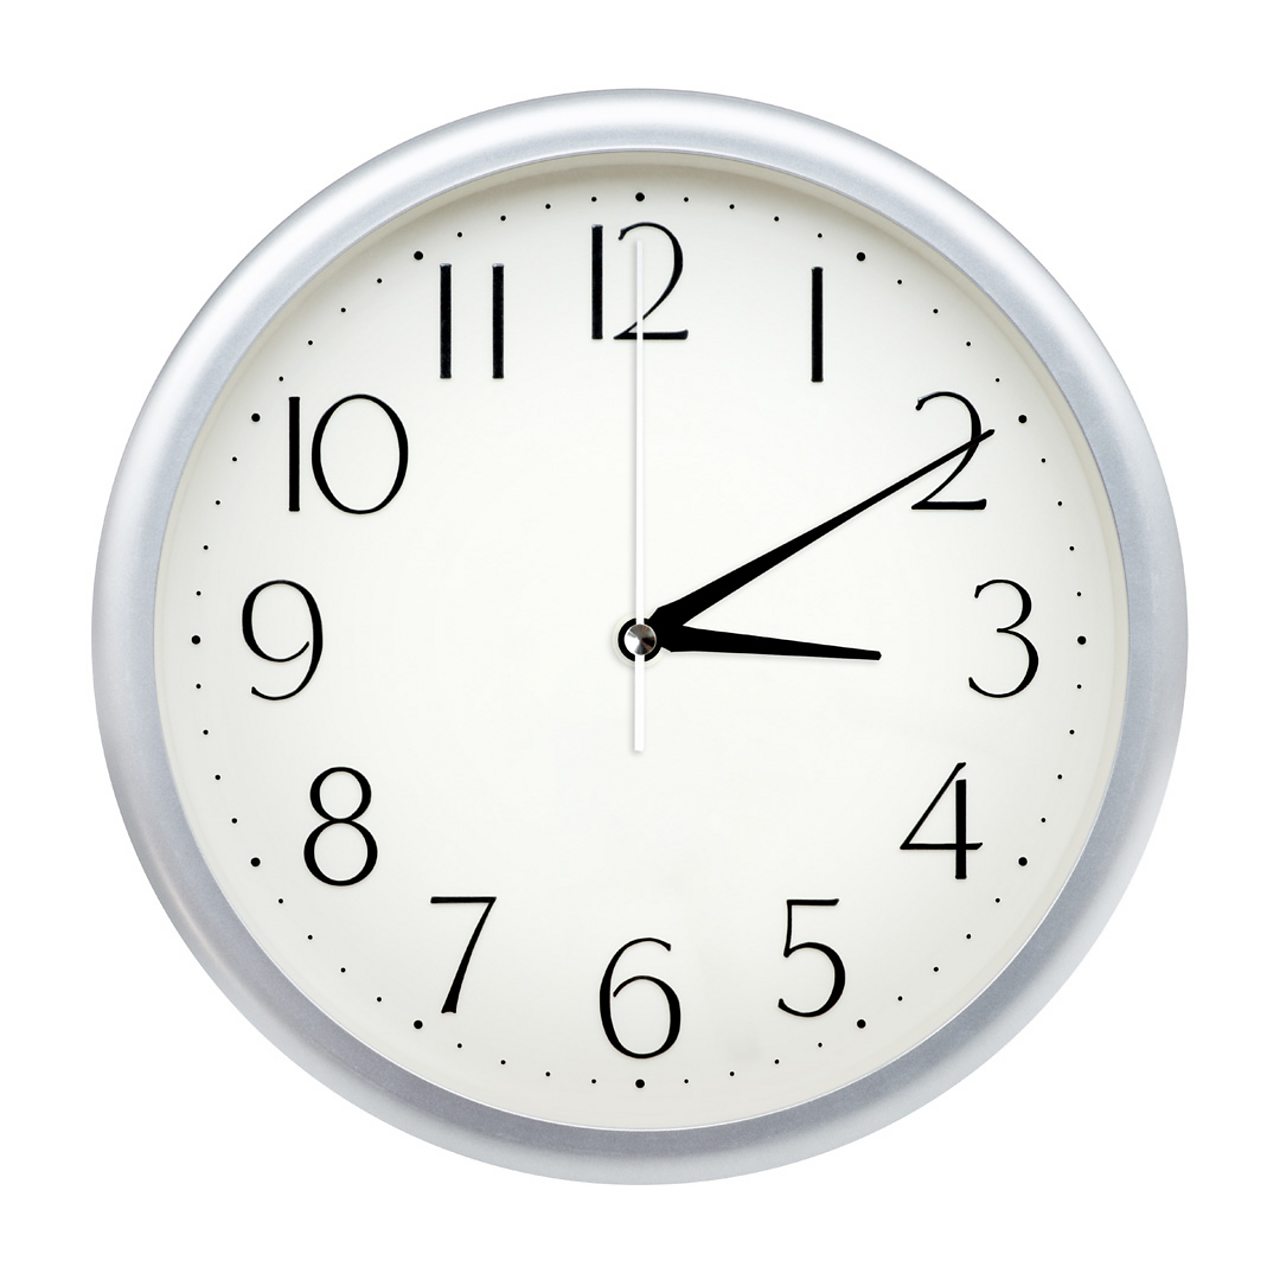 Image of a clock face showing 3.10